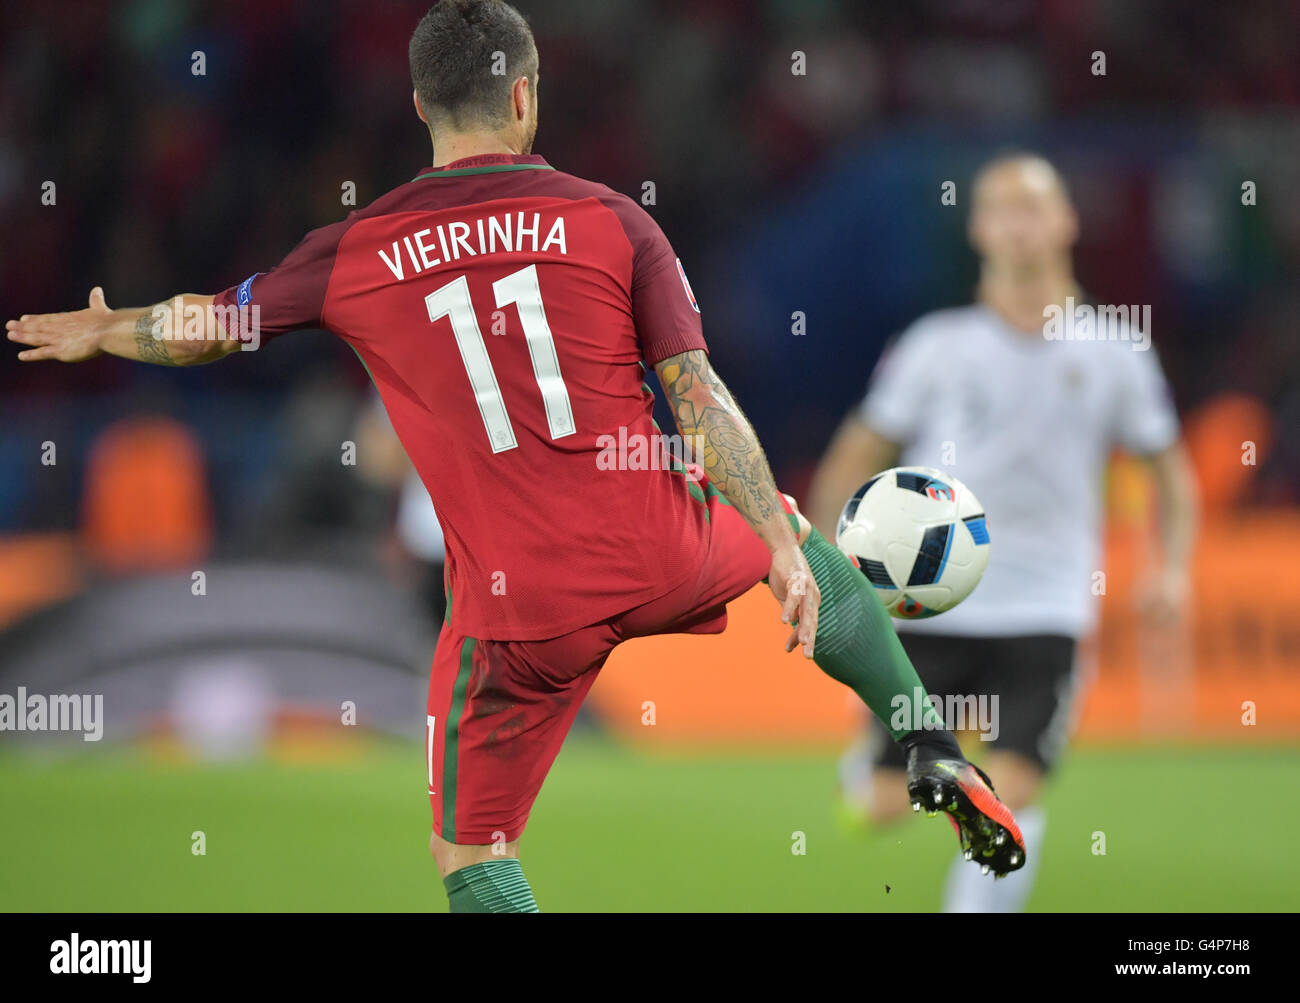 Paris, France. 18th June, 2016. Vieirinha of Portugal in action during the UEFA Euro 2016 Group F soccer match Portugal vs. Austria at the Parc des Princes stadium in Paris, France, 18 June 2016. Photo: Peter Kneffel/dpa/Alamy Live News Stock Photo